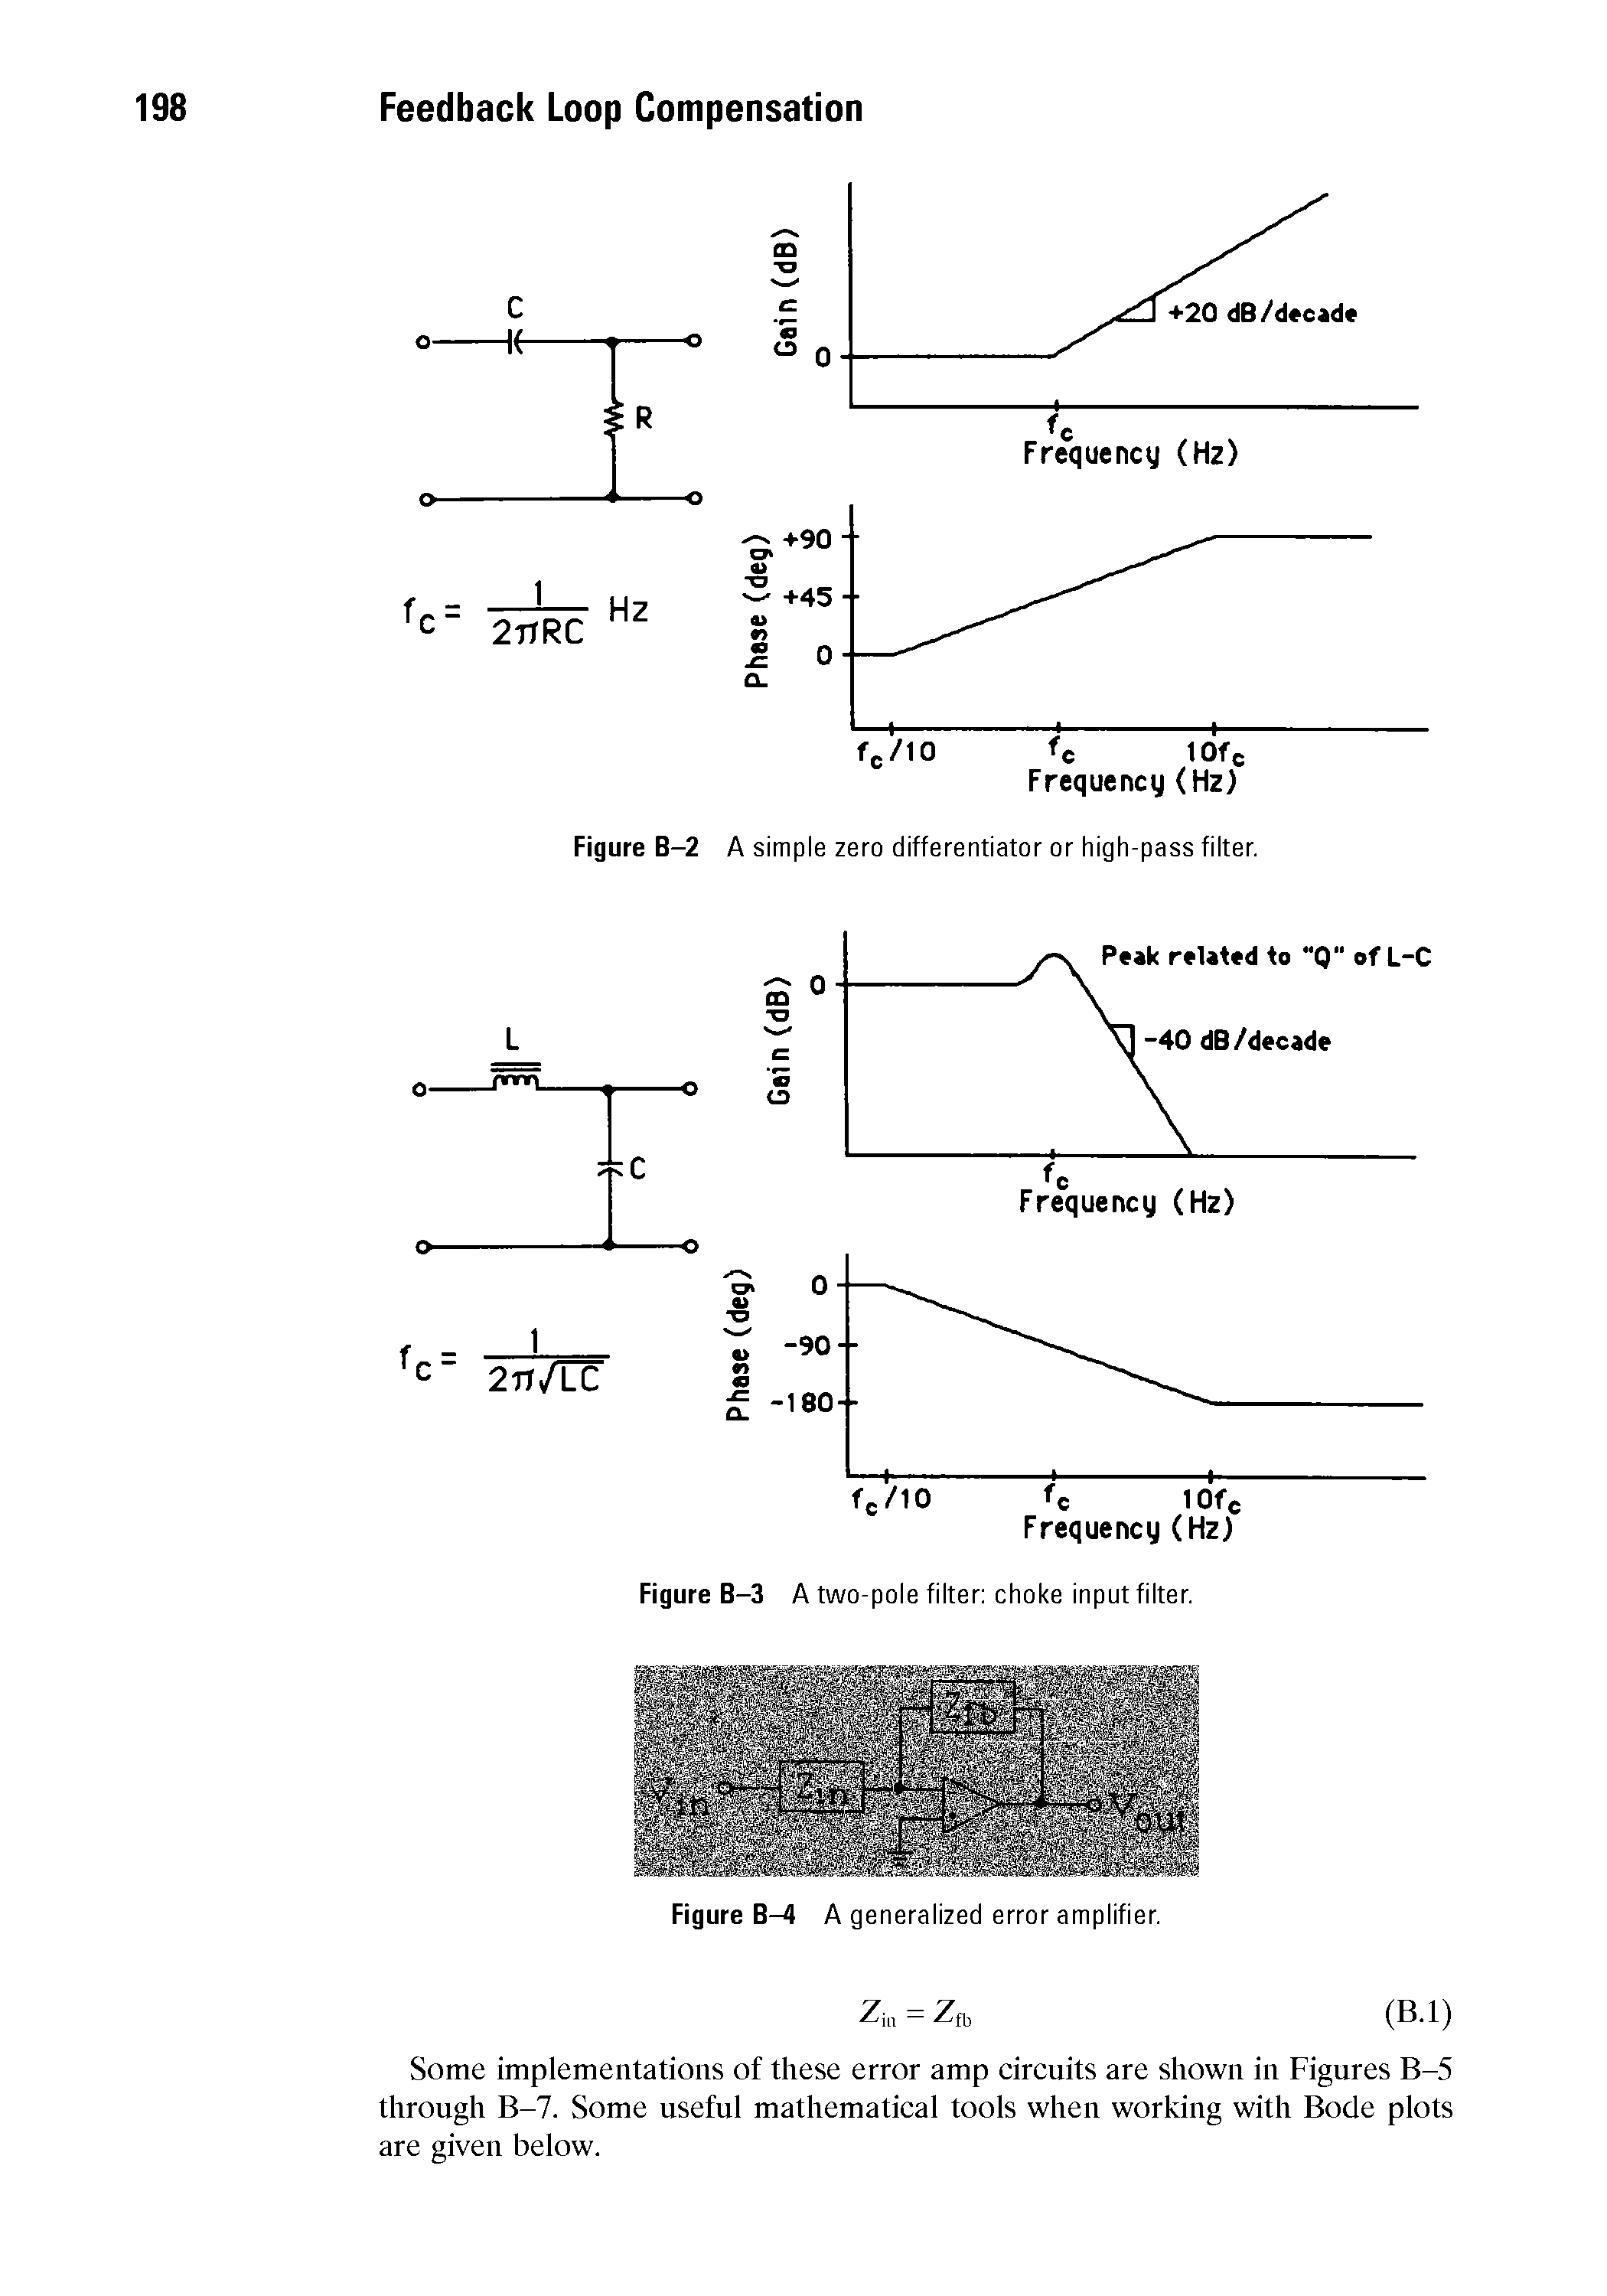 Figure B-2 A simple zero differentiator or high-pass filter.